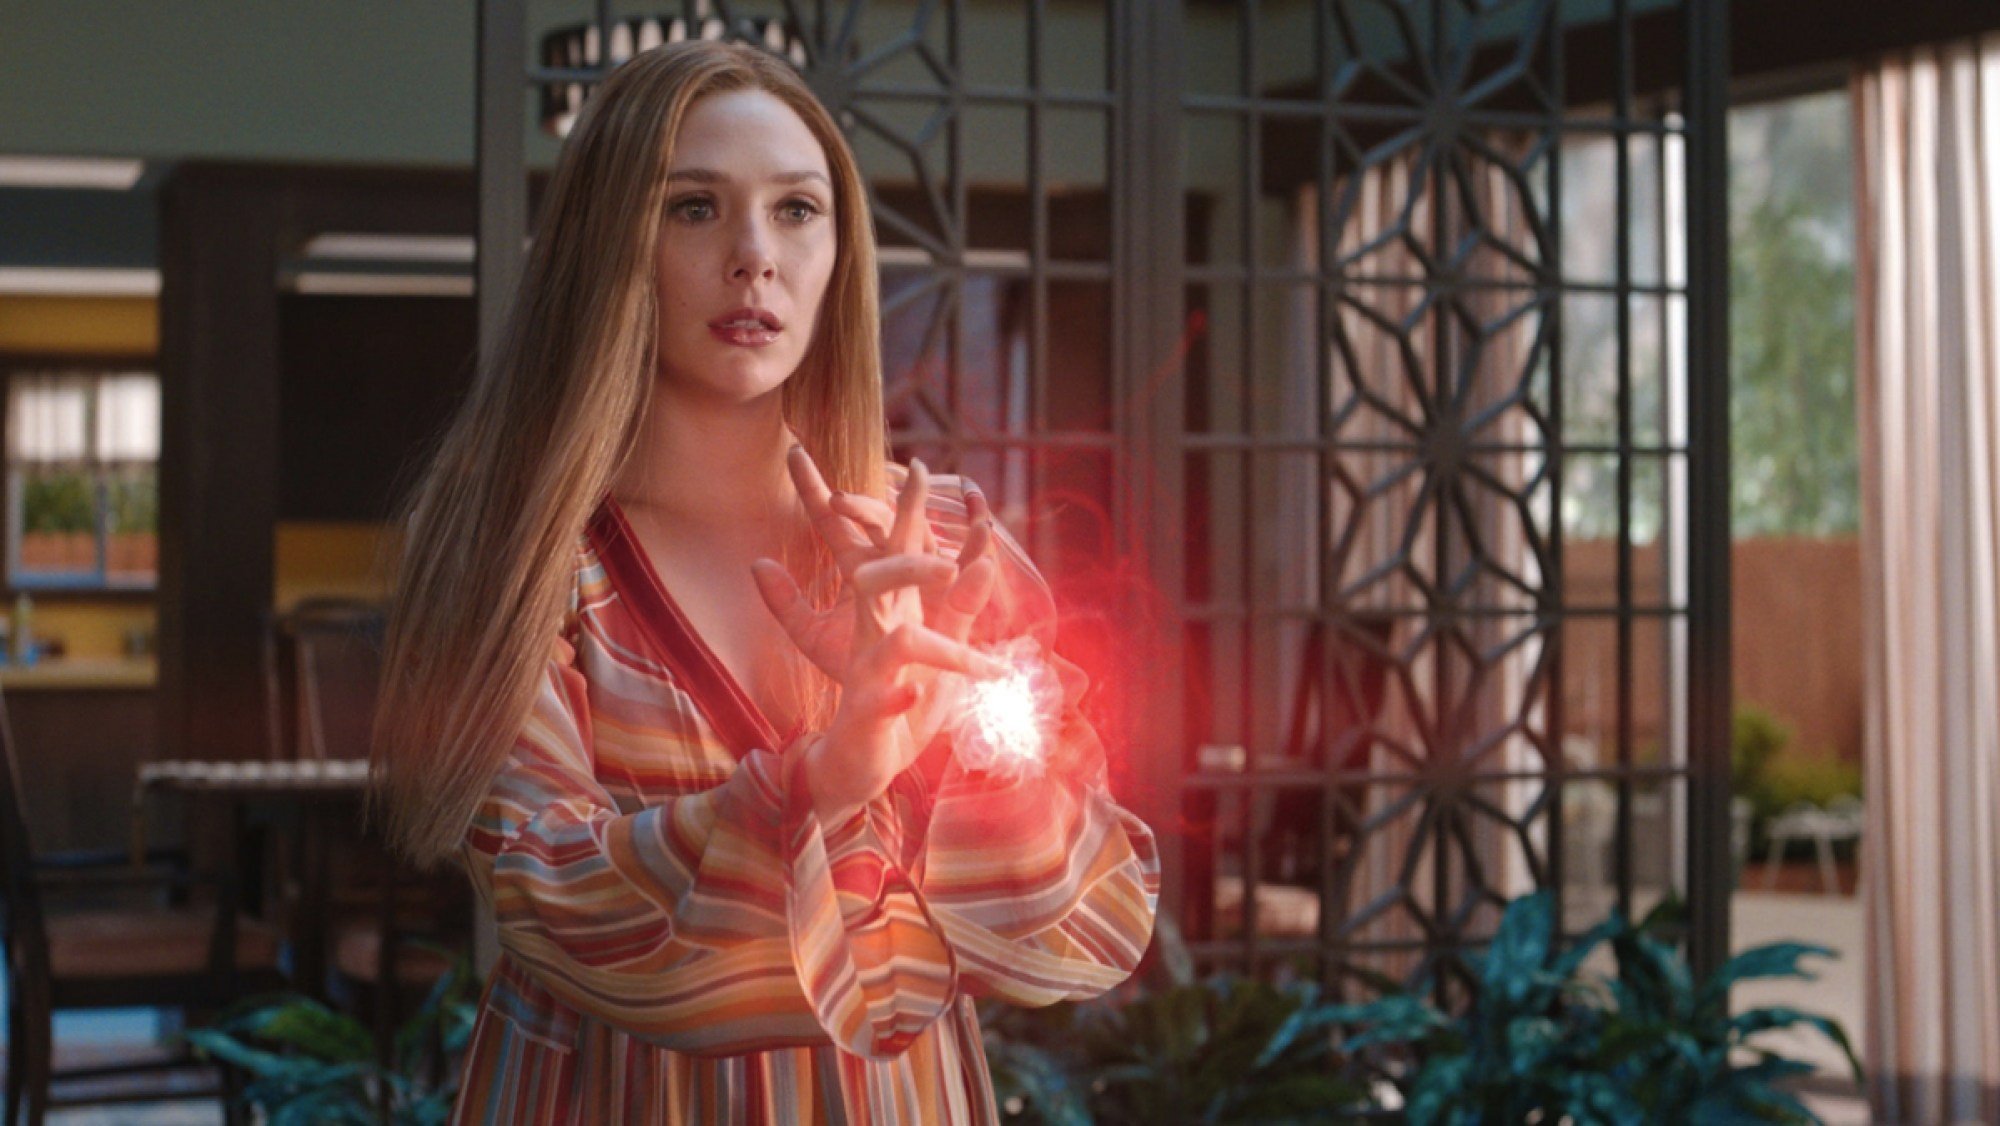 Wanda Maximoff (Elizabeth Olsen) harnesses her power, which looks like a glowing red orb in her hands, in 'WandaVision'